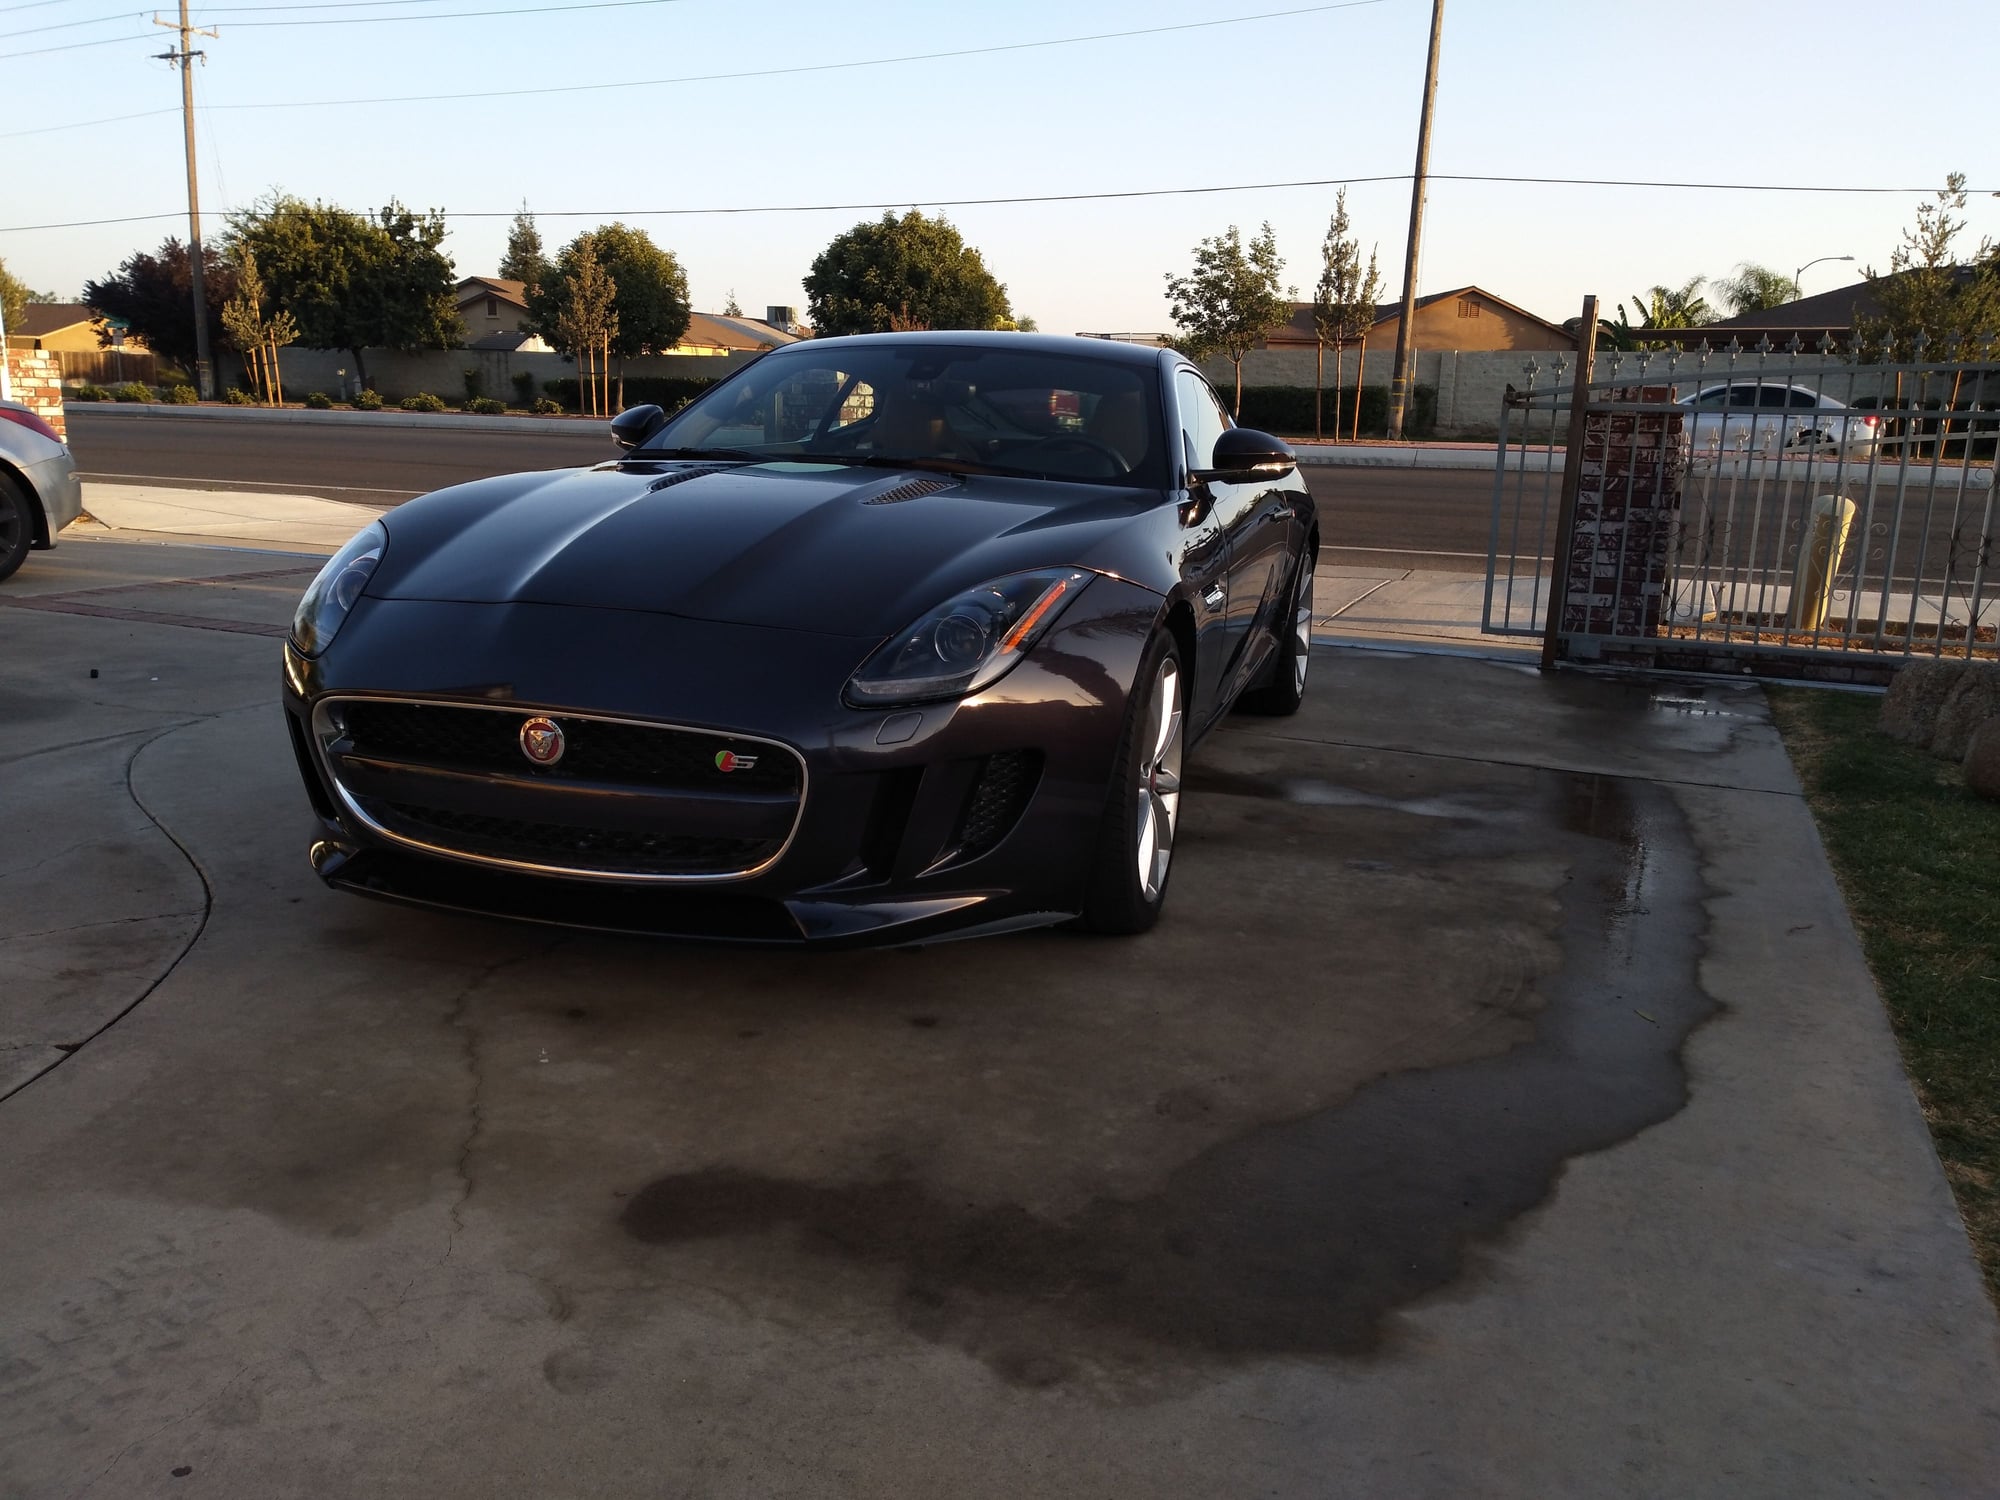 2016 Jaguar F-Type - 2016 F type S - Used - VIN sajwa6bu6g8k35218 - 24,000 Miles - 6 cyl - Automatic - Coupe - Bakersfield Ca, CA 93307, United States